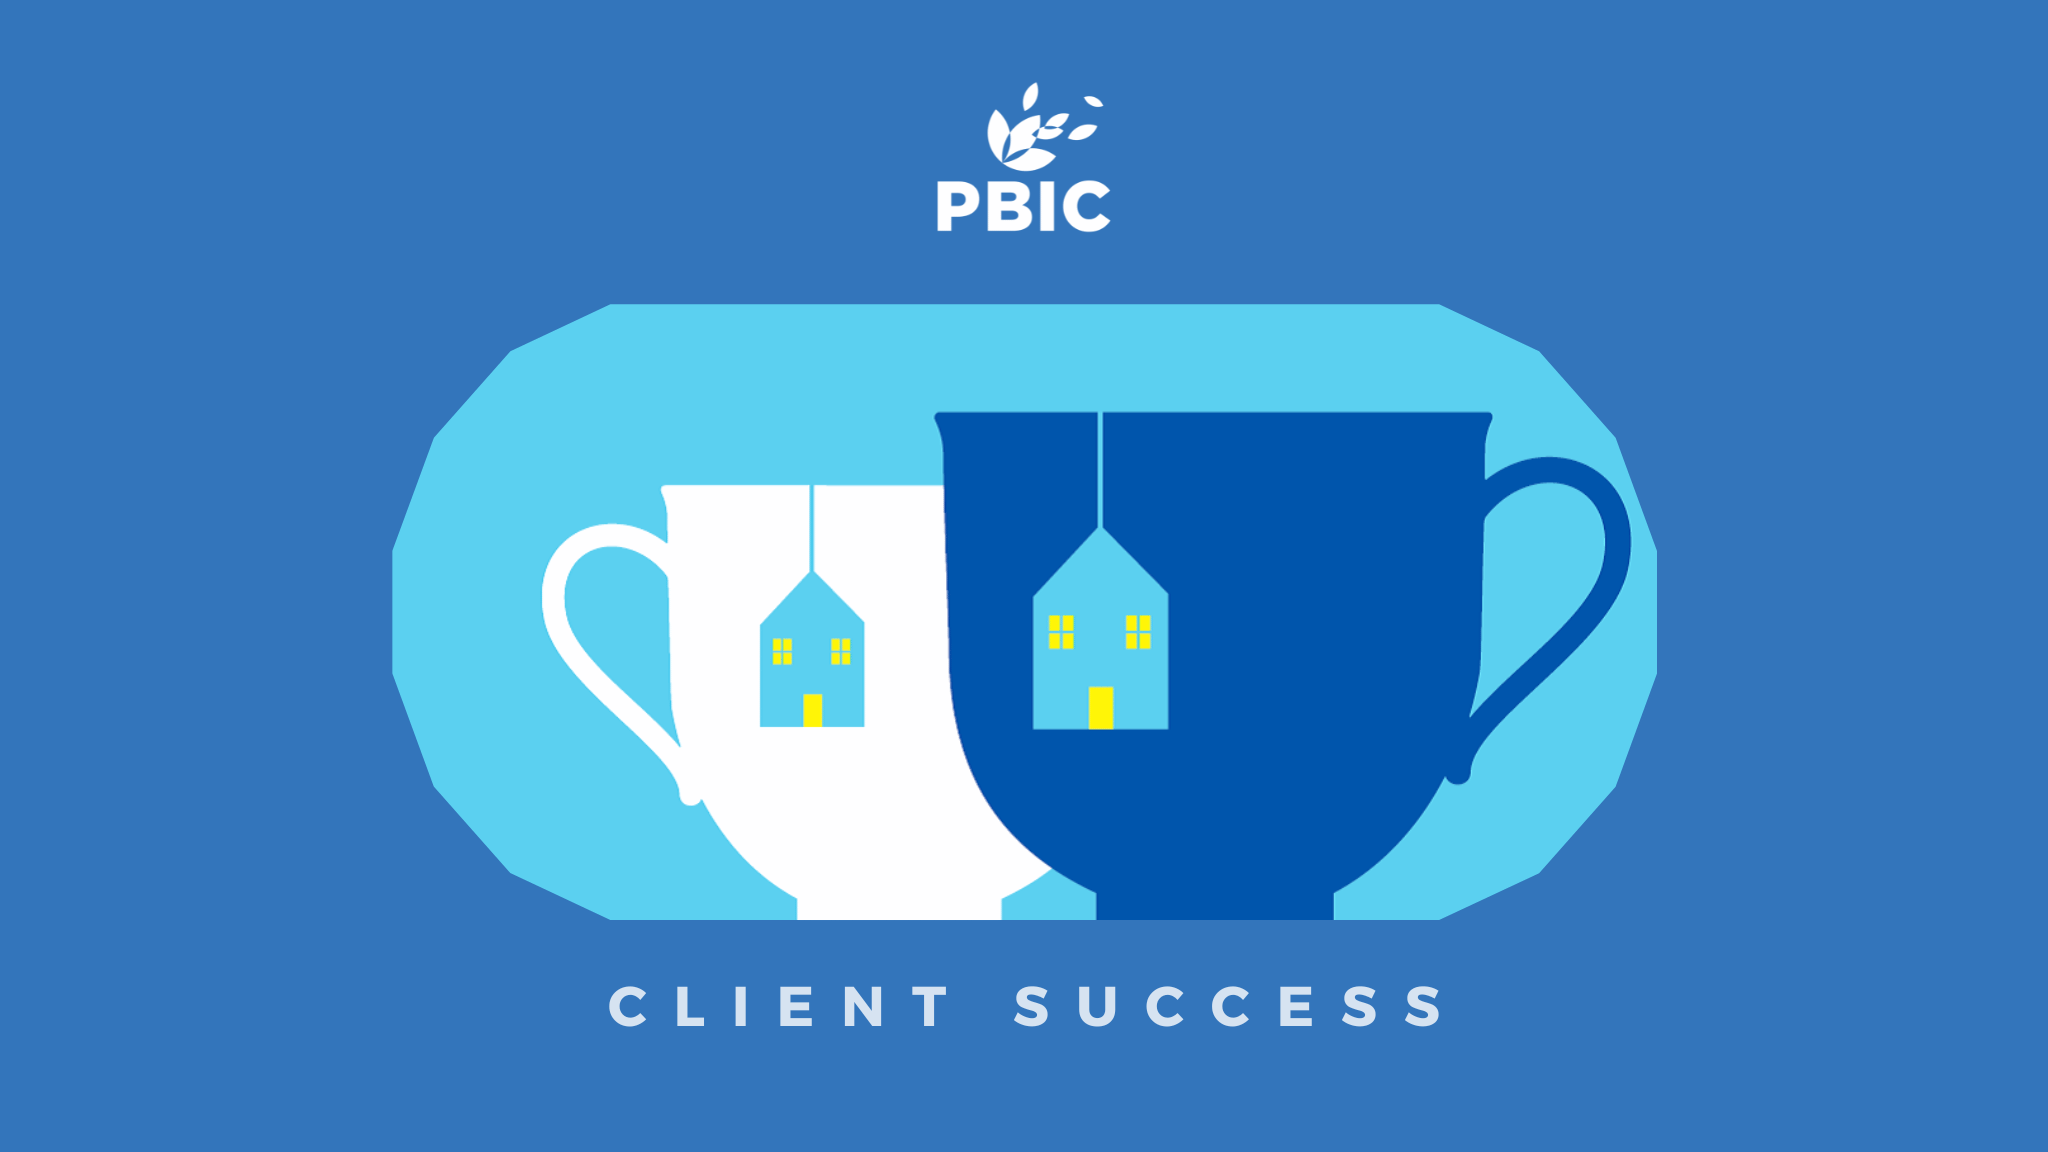 Client success: How PBIC supported clients to apply for pre-settled status under the EU Settlement Scheme (EUSS)